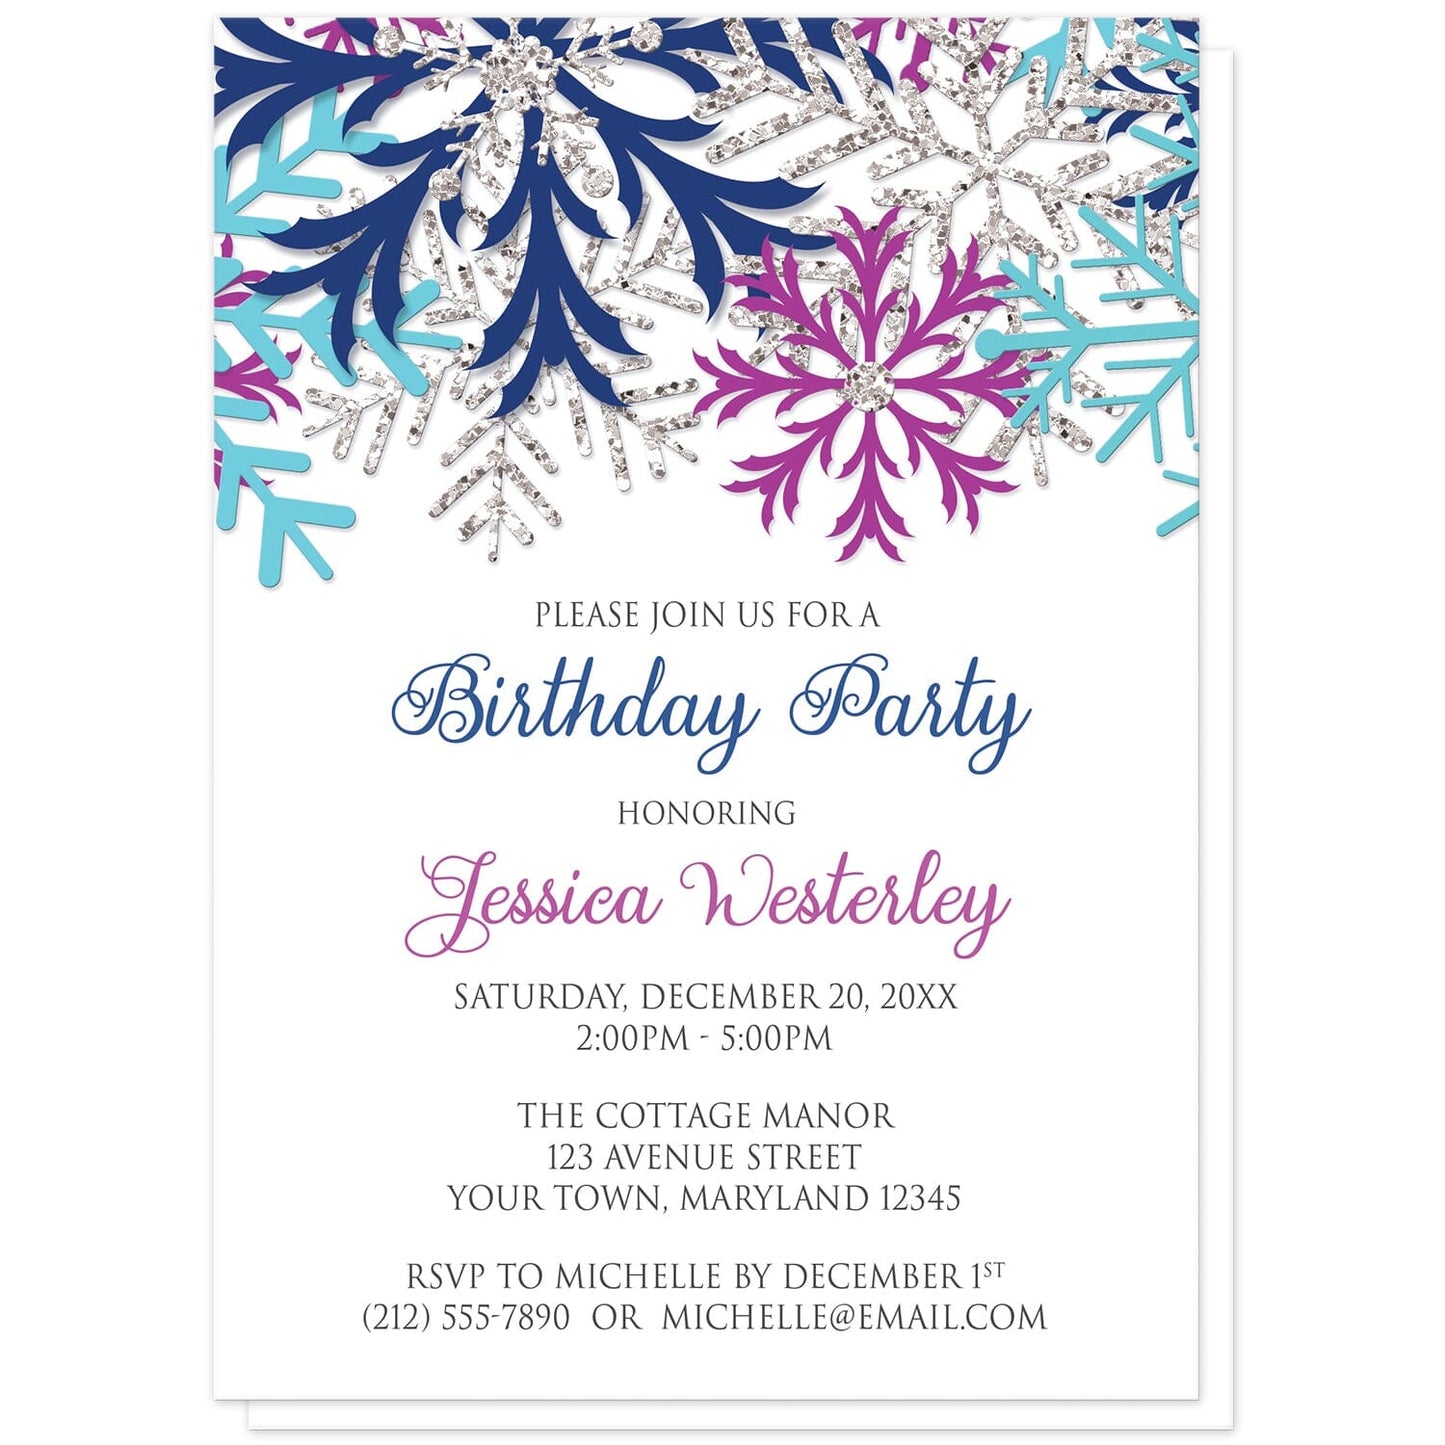 Turquoise Navy Orchid Silver Snowflake Birthday Party Invitations at Artistically Invited. Beautiful turquoise navy orchid silver snowflake birthday party invitations with turquoise blue, navy blue, orchid purple, and silver-colored glitter-illustrated snowflakes over a white background. Your personalized birthday party details are custom printed in navy blue, purple, and gray over white below the pretty snowflakes. 